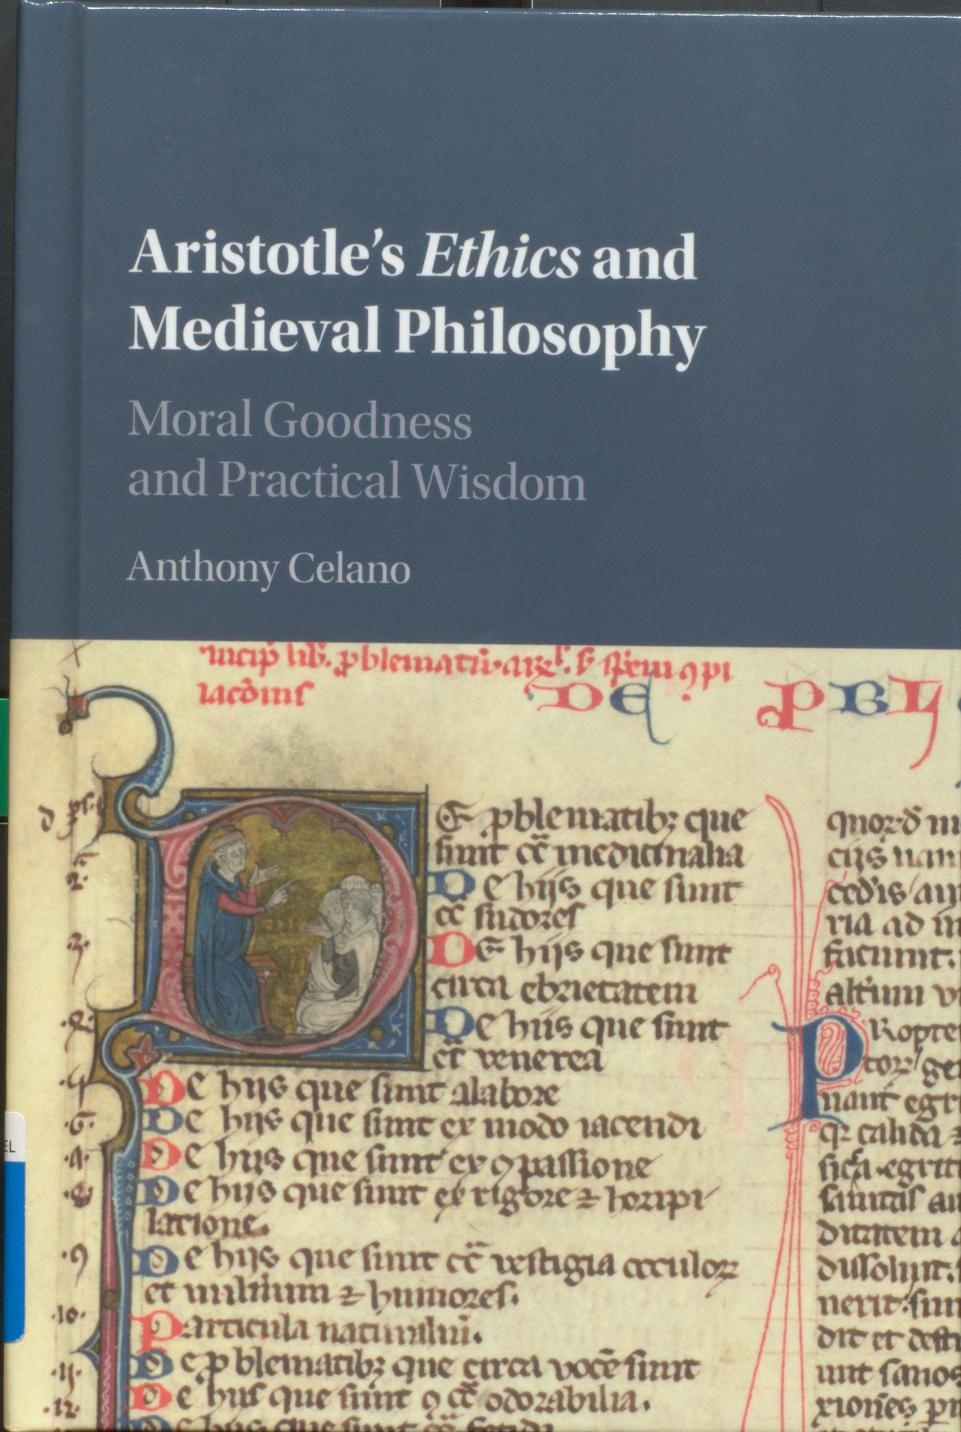 Aristotle's Ethics and Medieval Philosophy: Moral Goodness and Practical Wisdom